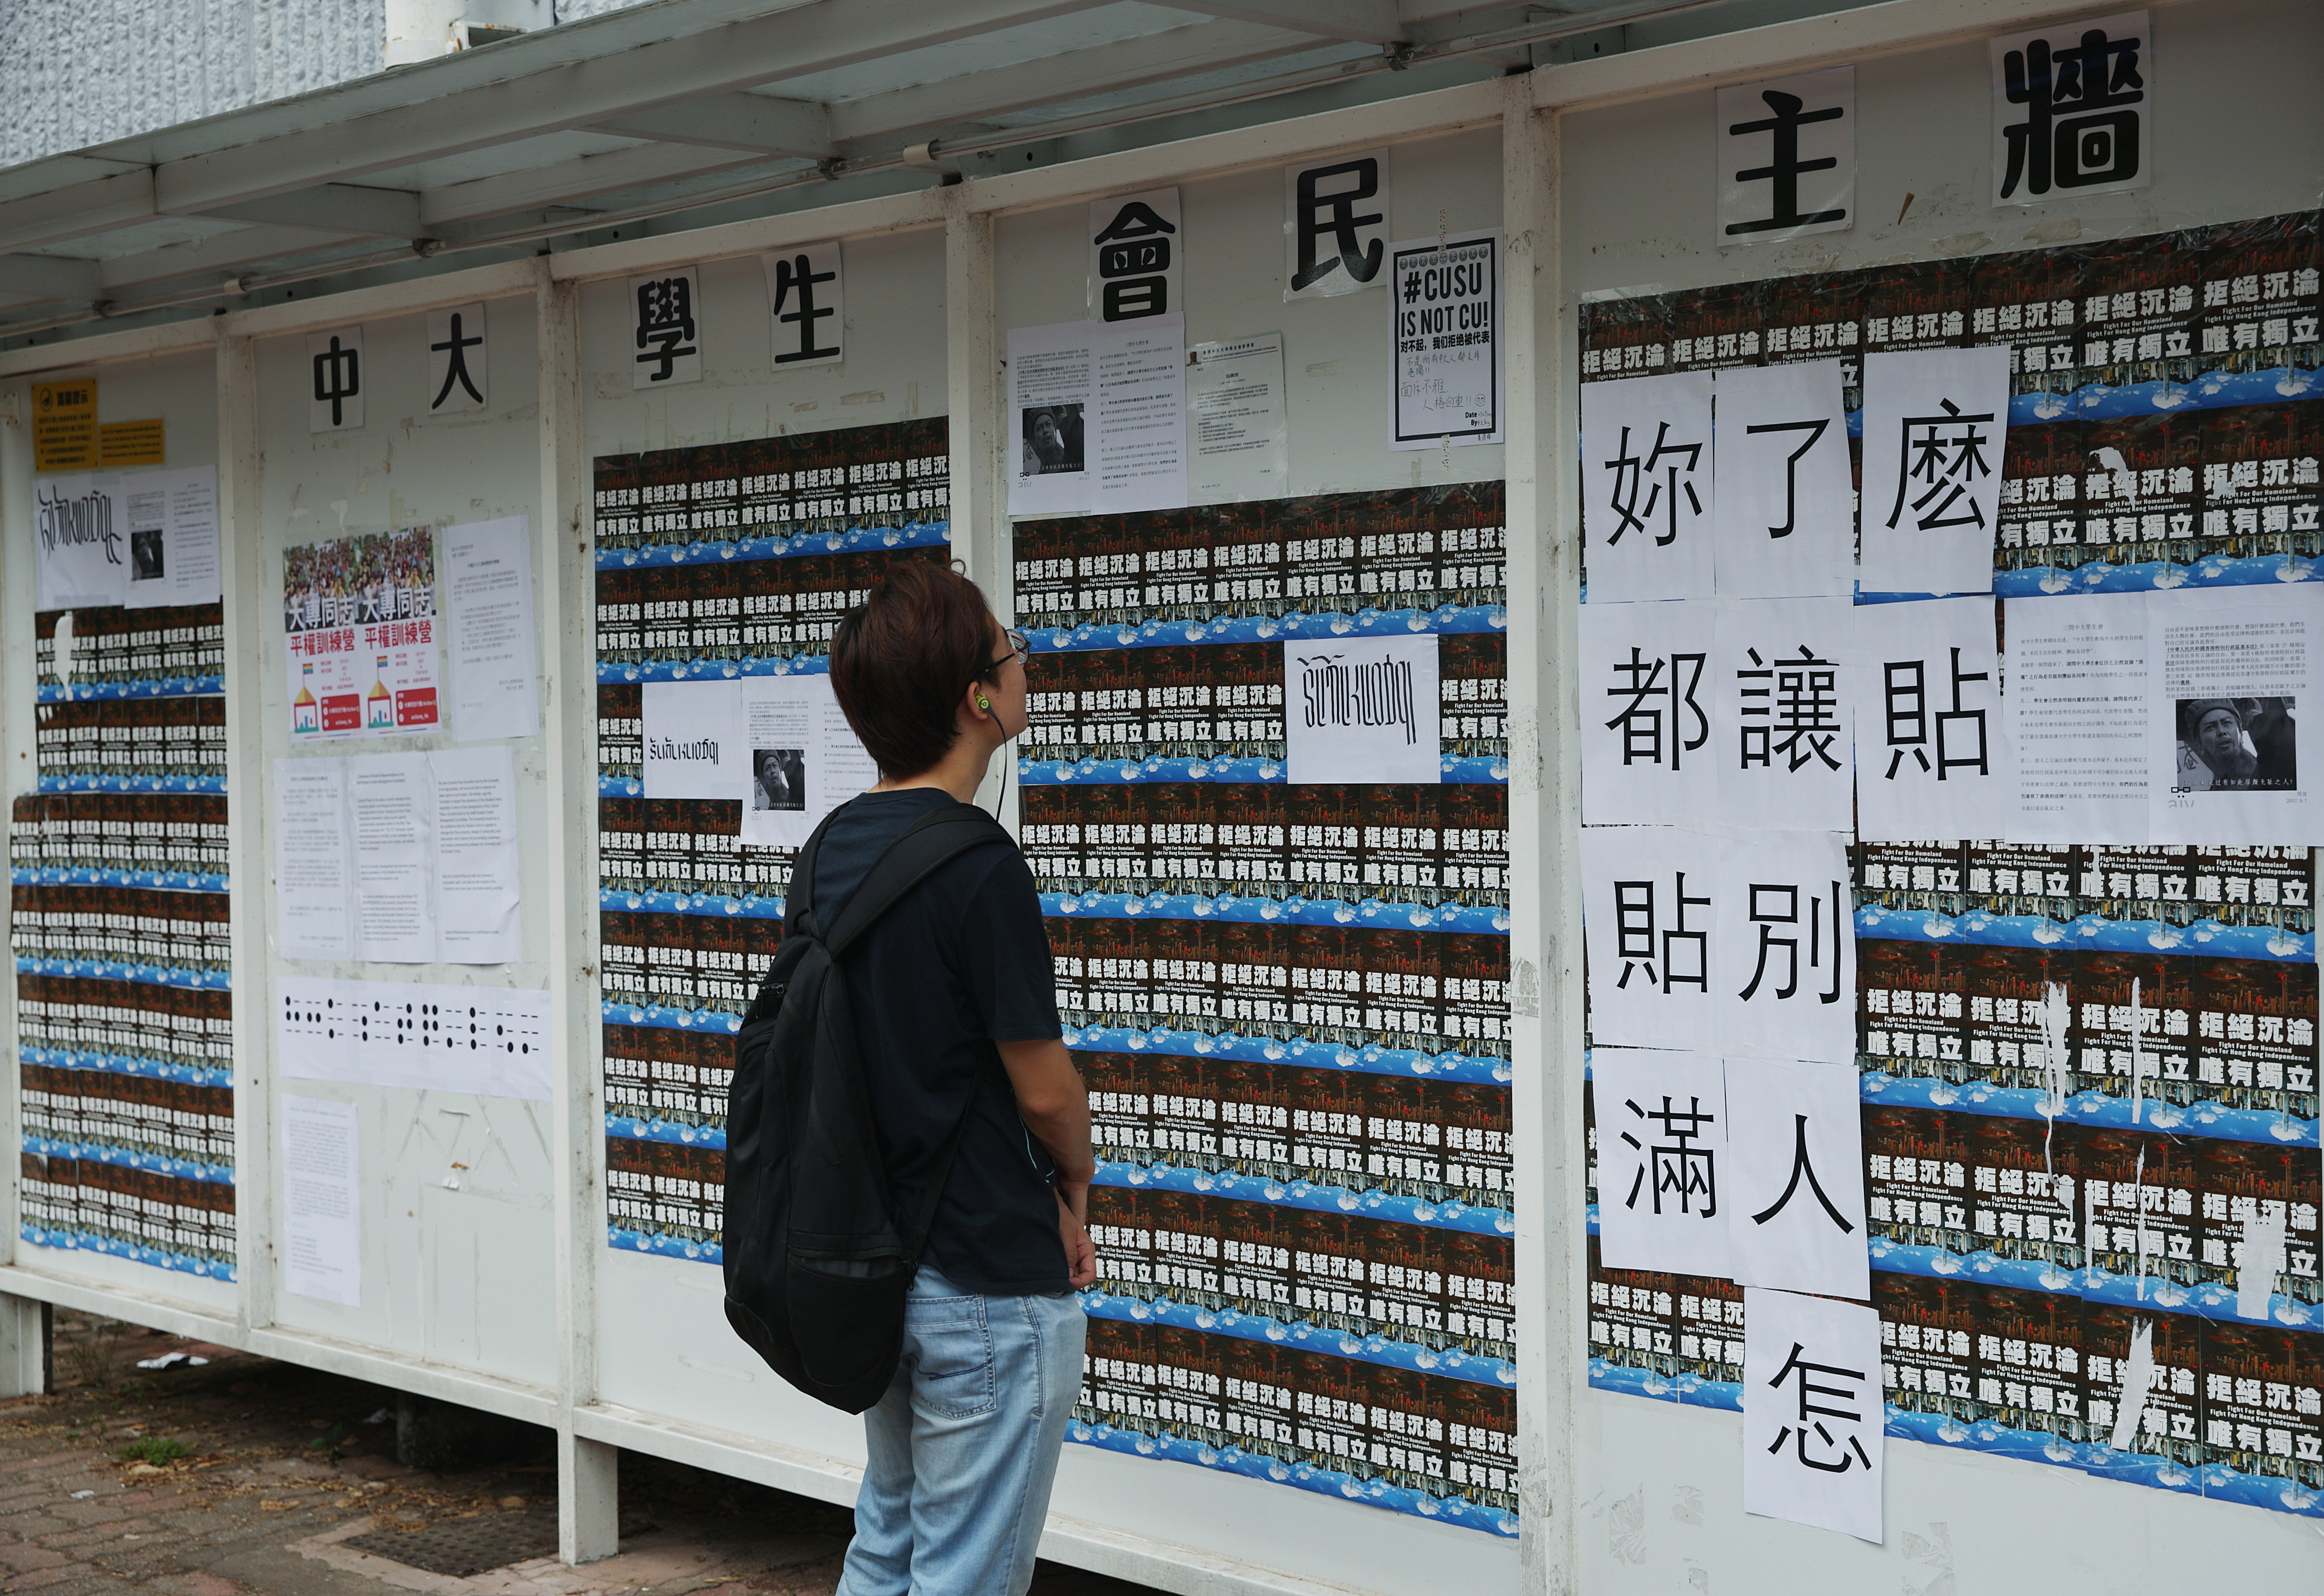 Pro- and anti-independence leaflets posted on the “democracy wall” at Chinese University in Sha Tin, on September 7. Photo: Sam Tsang